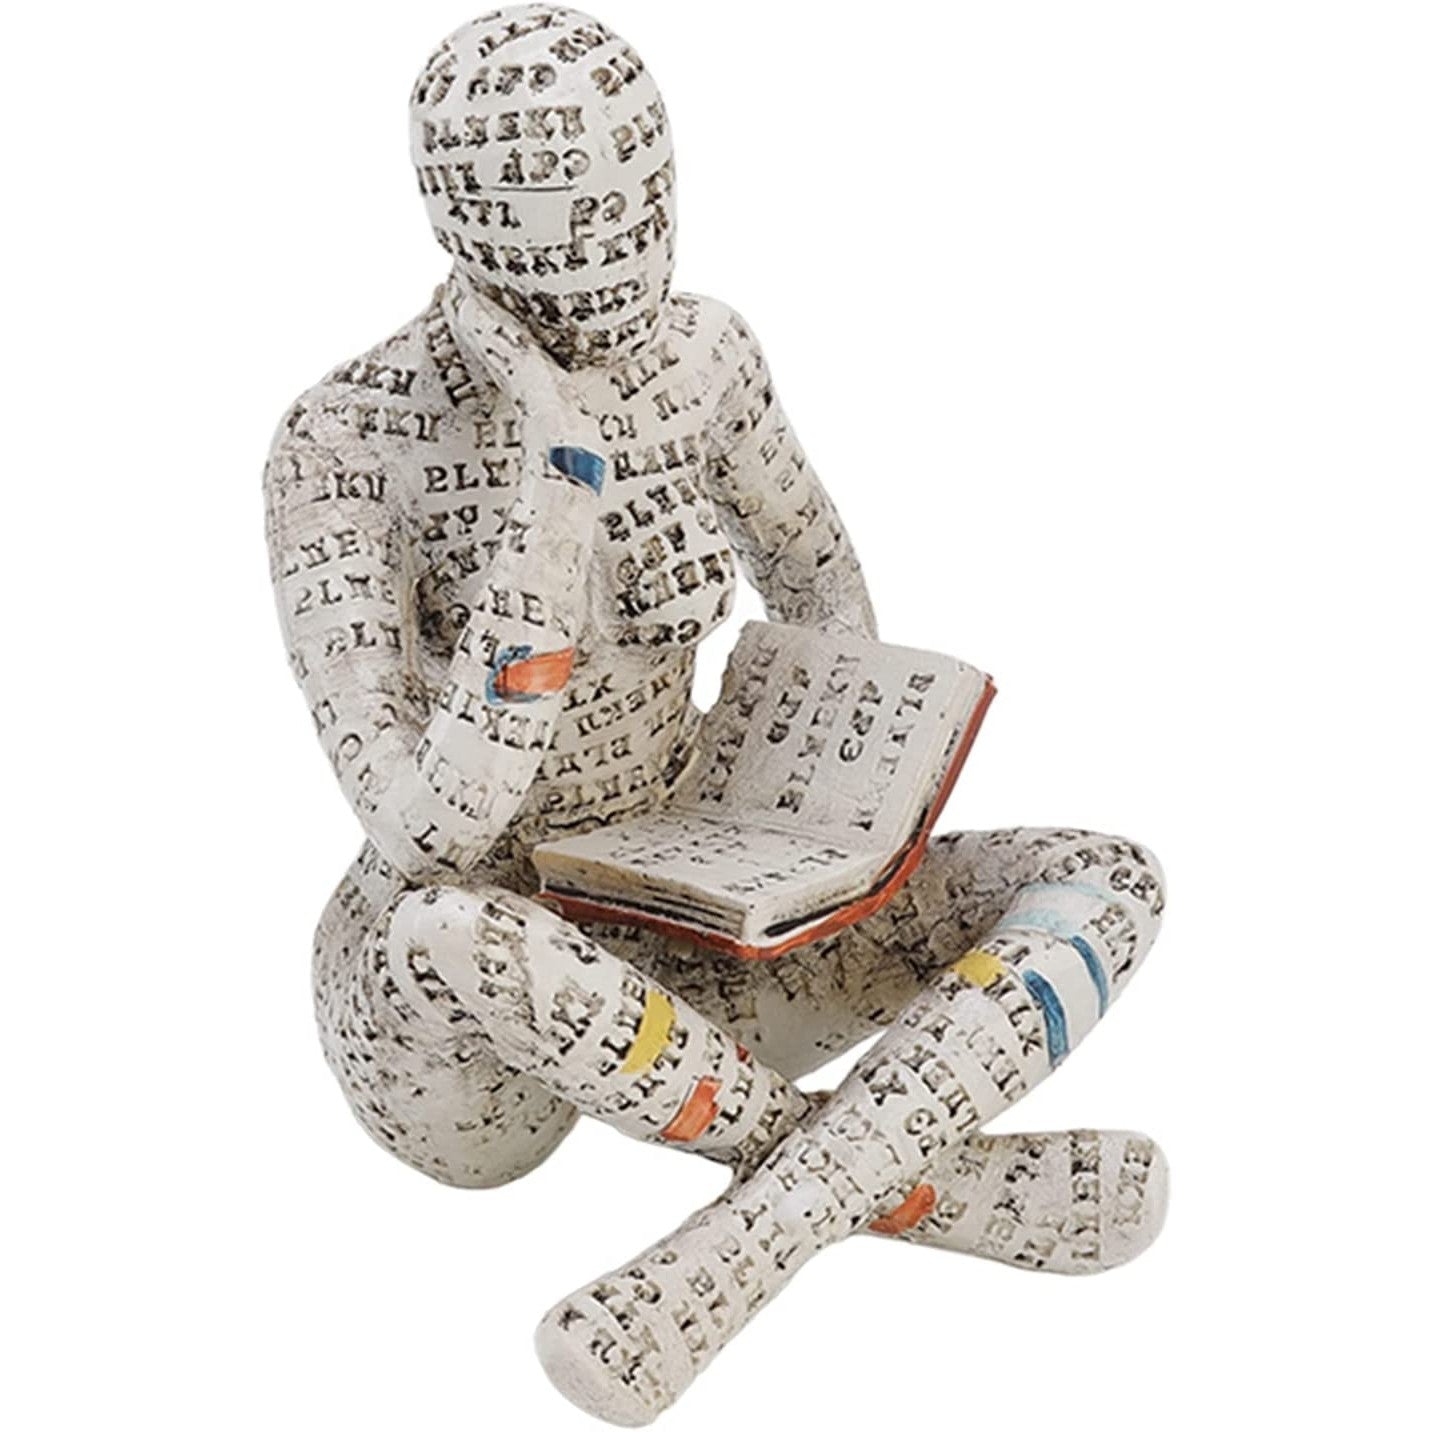 A figurine of a woman sitting with her legs crossed deep in thought reading a book.